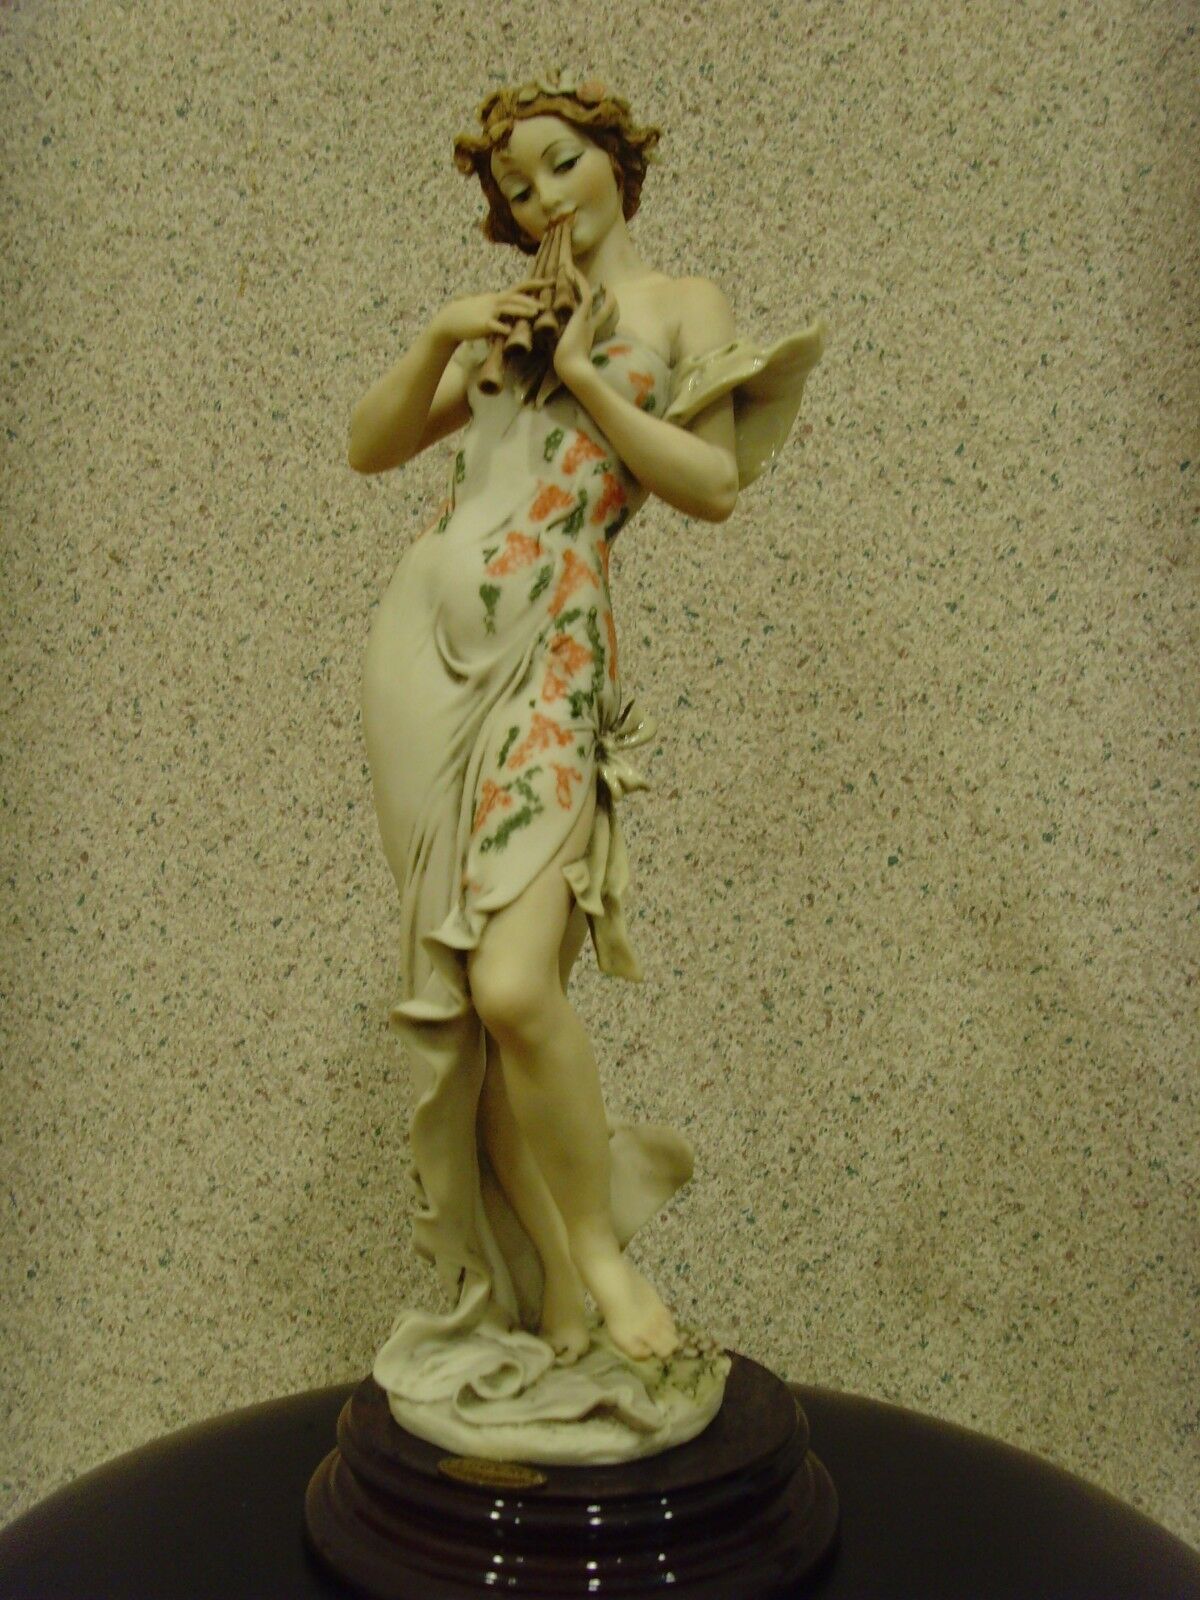 GIUSEPPE ARMANI MELODY 656C FIGURINE MEMBER ONLY MINT CONDITION